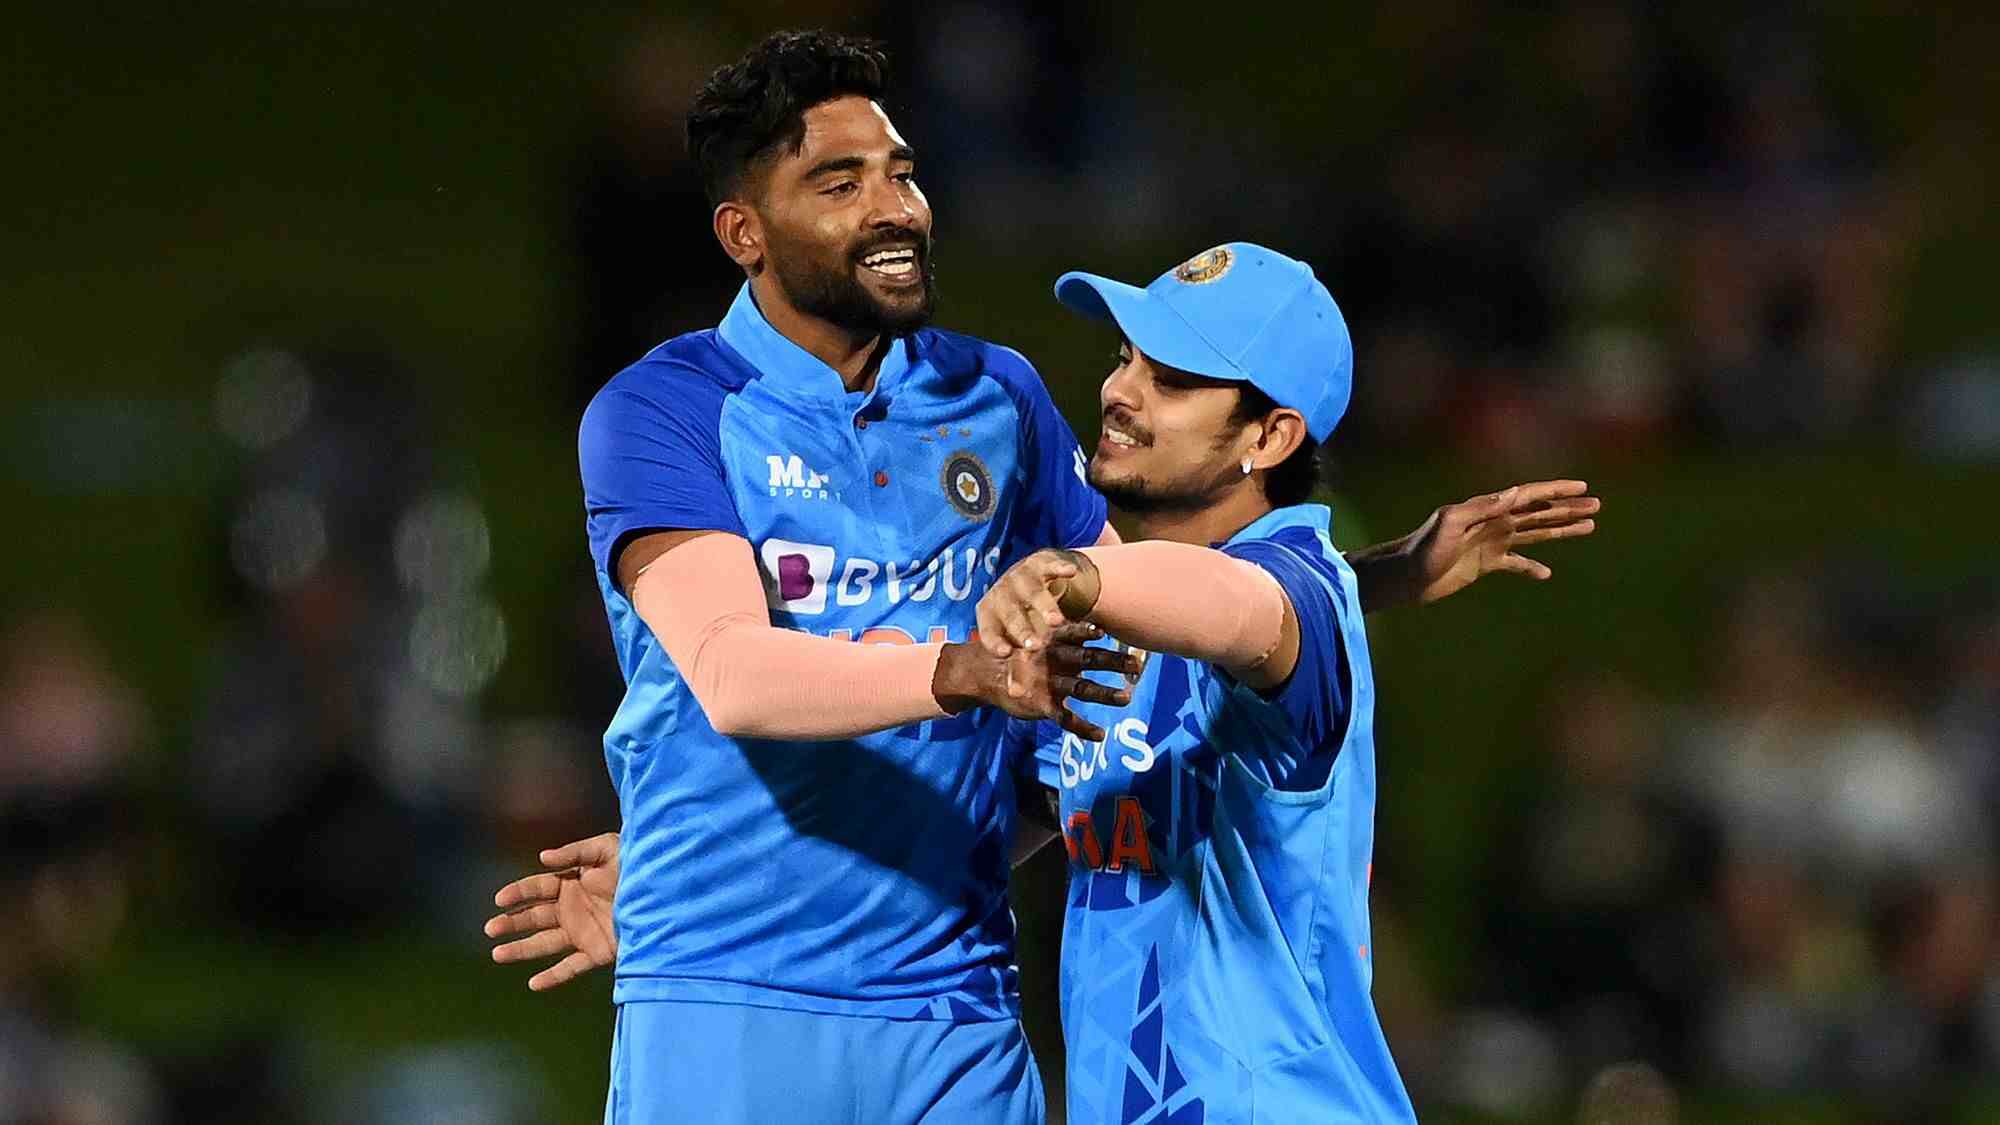 IND vs NZ Dream11 Prediction: India vs New Zealand 1st T20I predicted playing XI